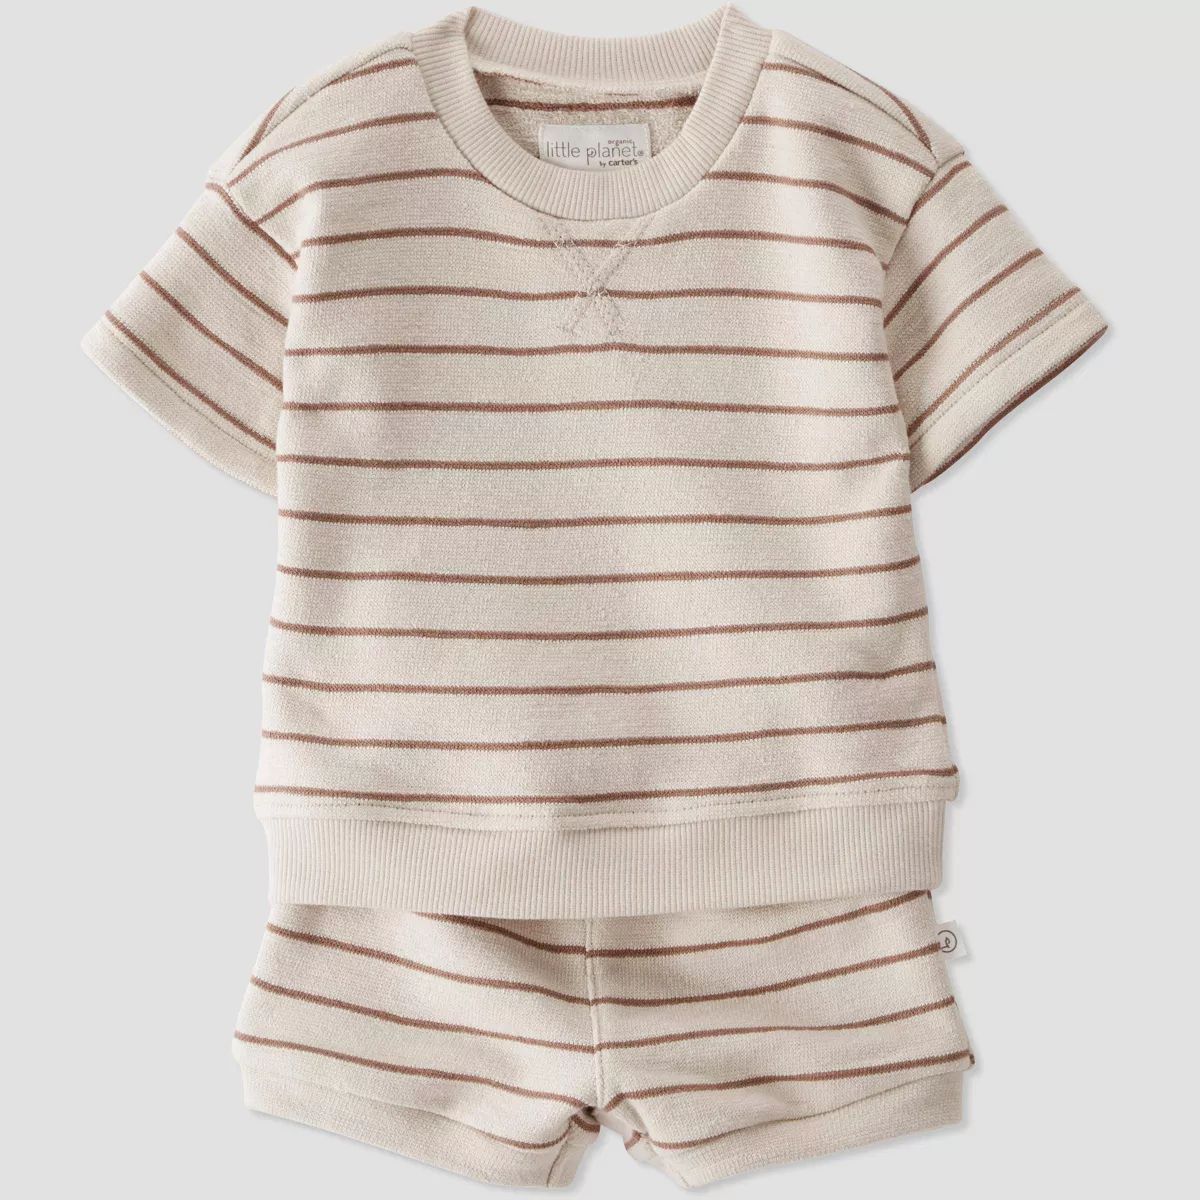 Little Planet by Carter’s Organic Baby 2pc Striped Shorts Set - Brown | Target